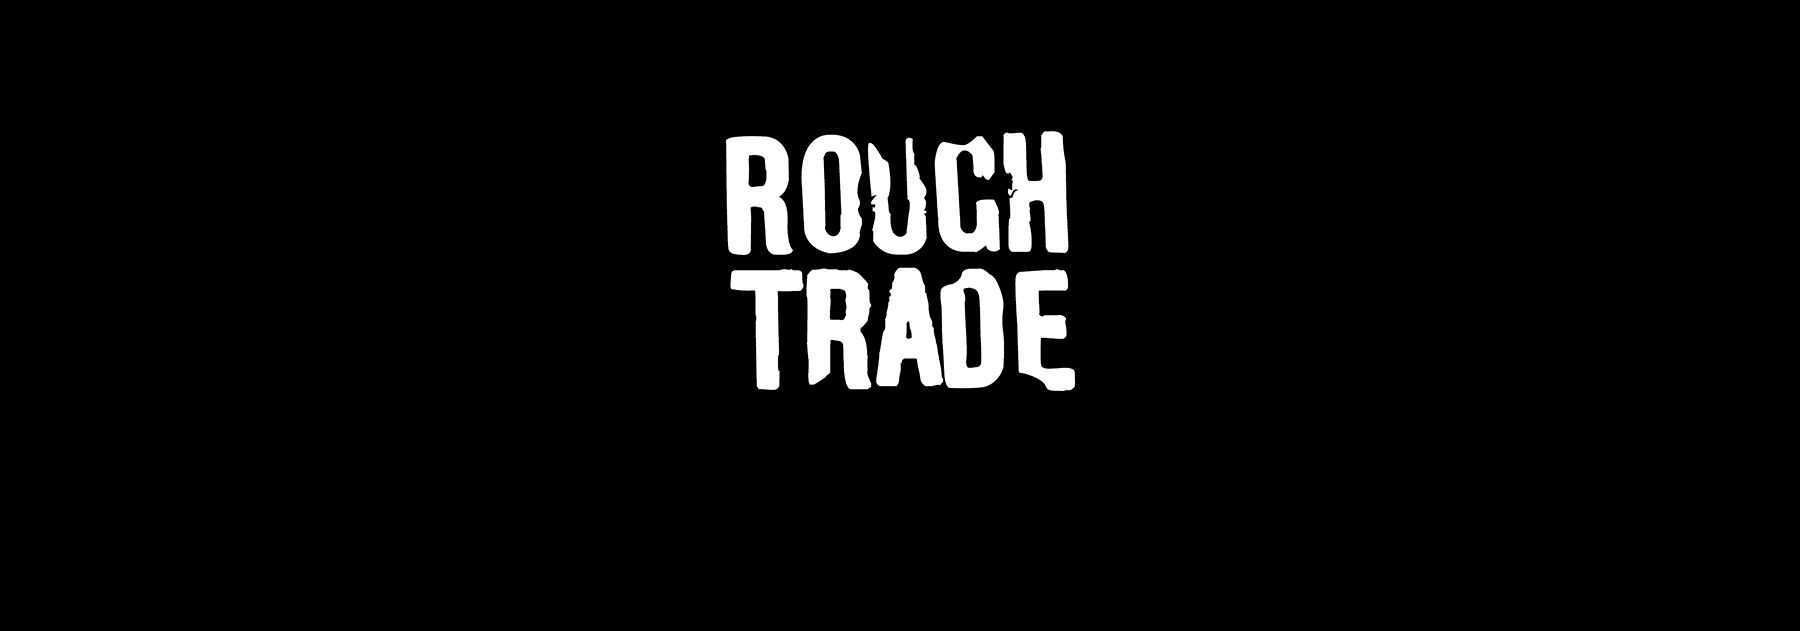 Rough Trade Newsletter - SIGN UP to receive 10% discount